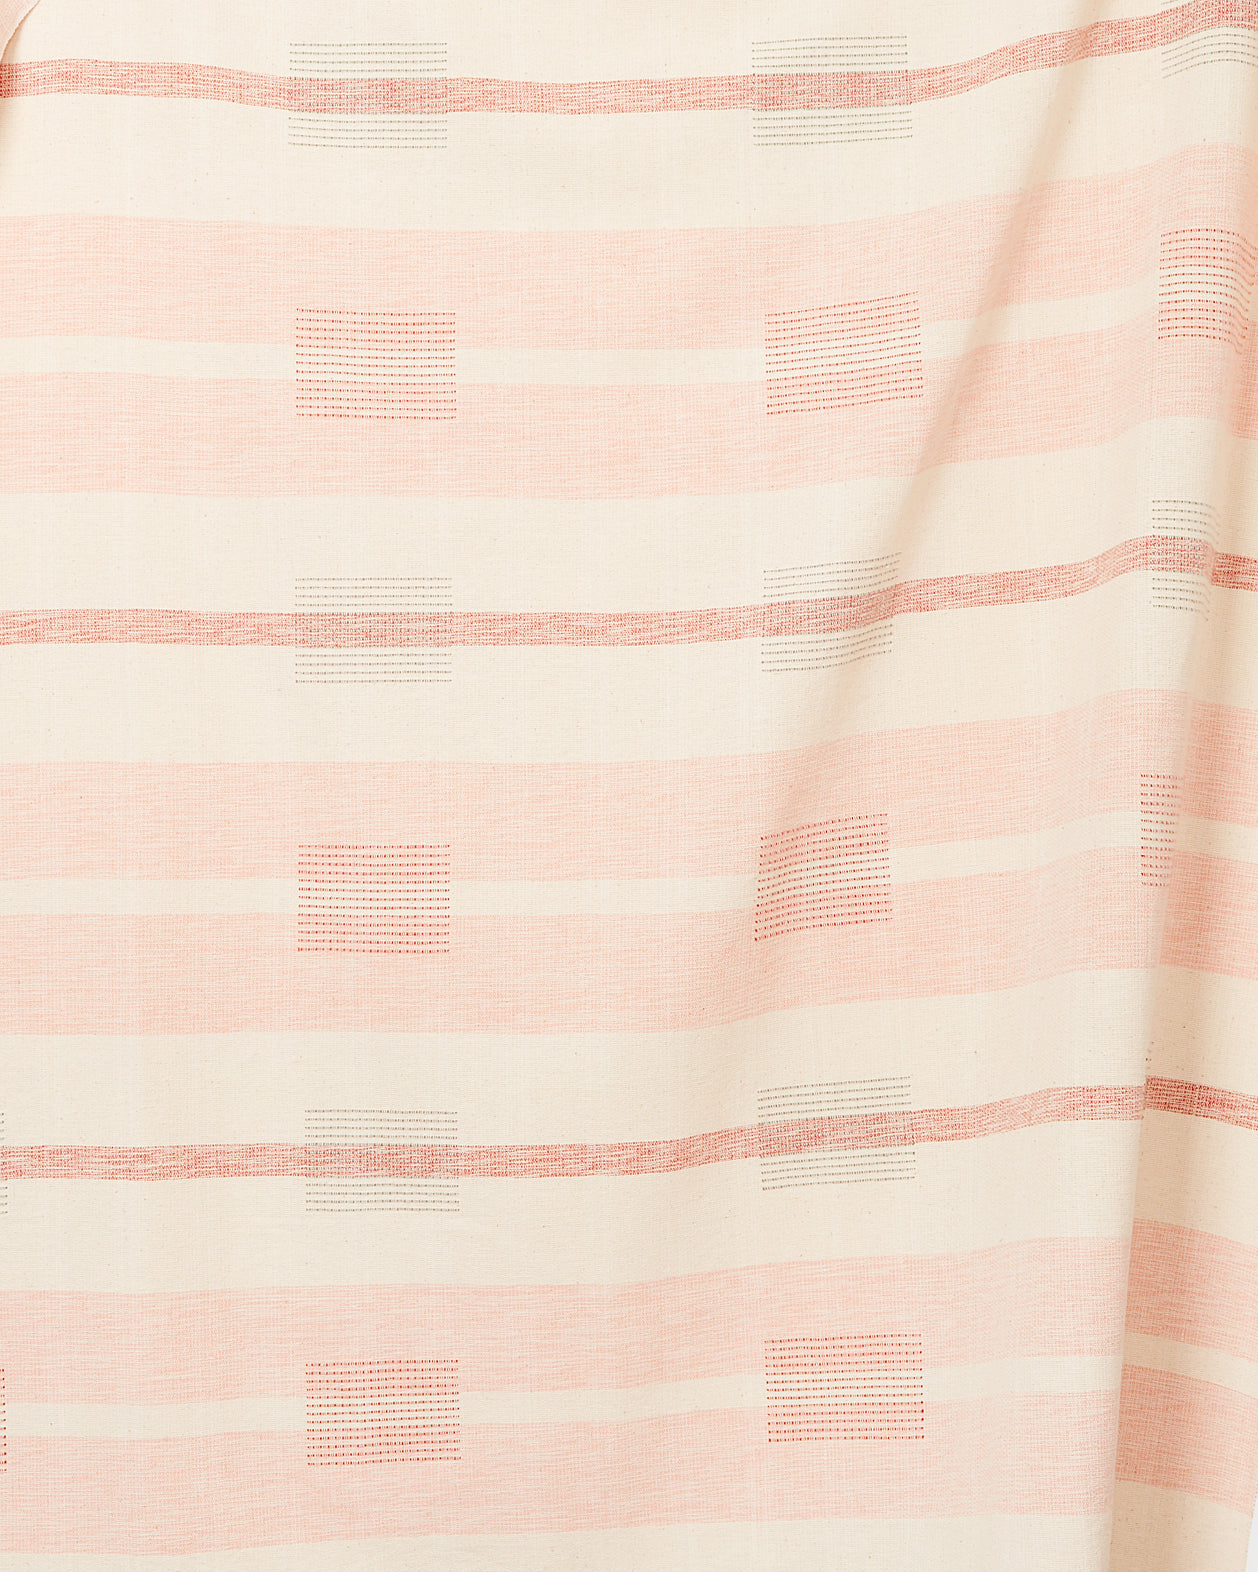 ethically handwoven oeko-tex certified cotton fabric yardage by MINNA, peach and red blocks stripes pattern